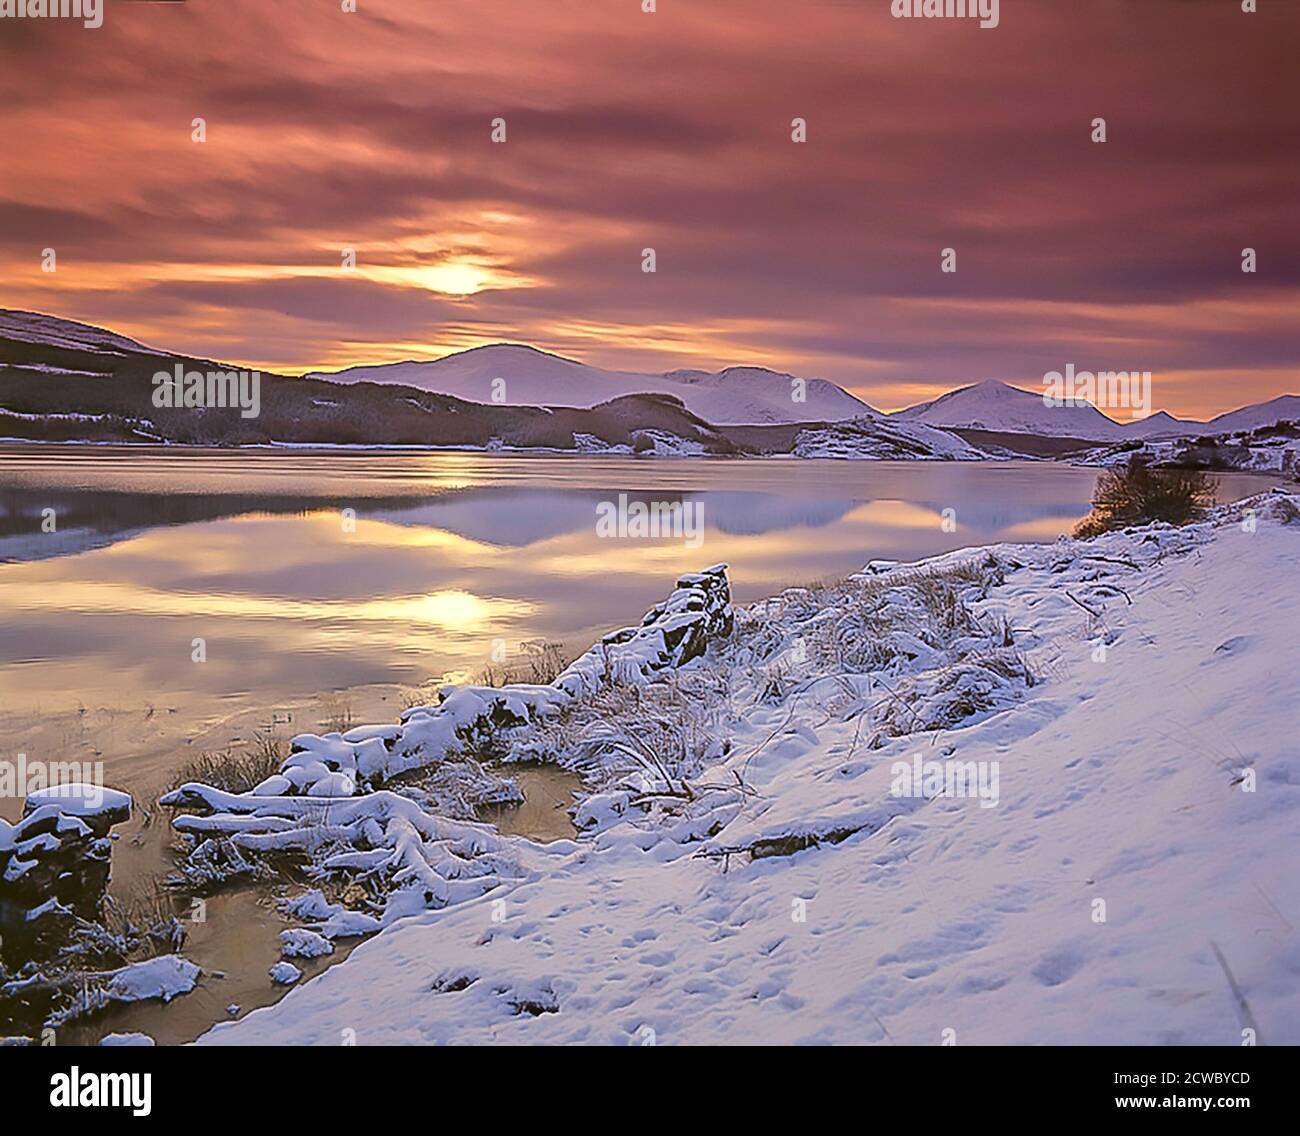 A Winters sunset over the Lochaber Hills from Moy Loch on Creag Meagaidh, Glen Spean. Stock Photo